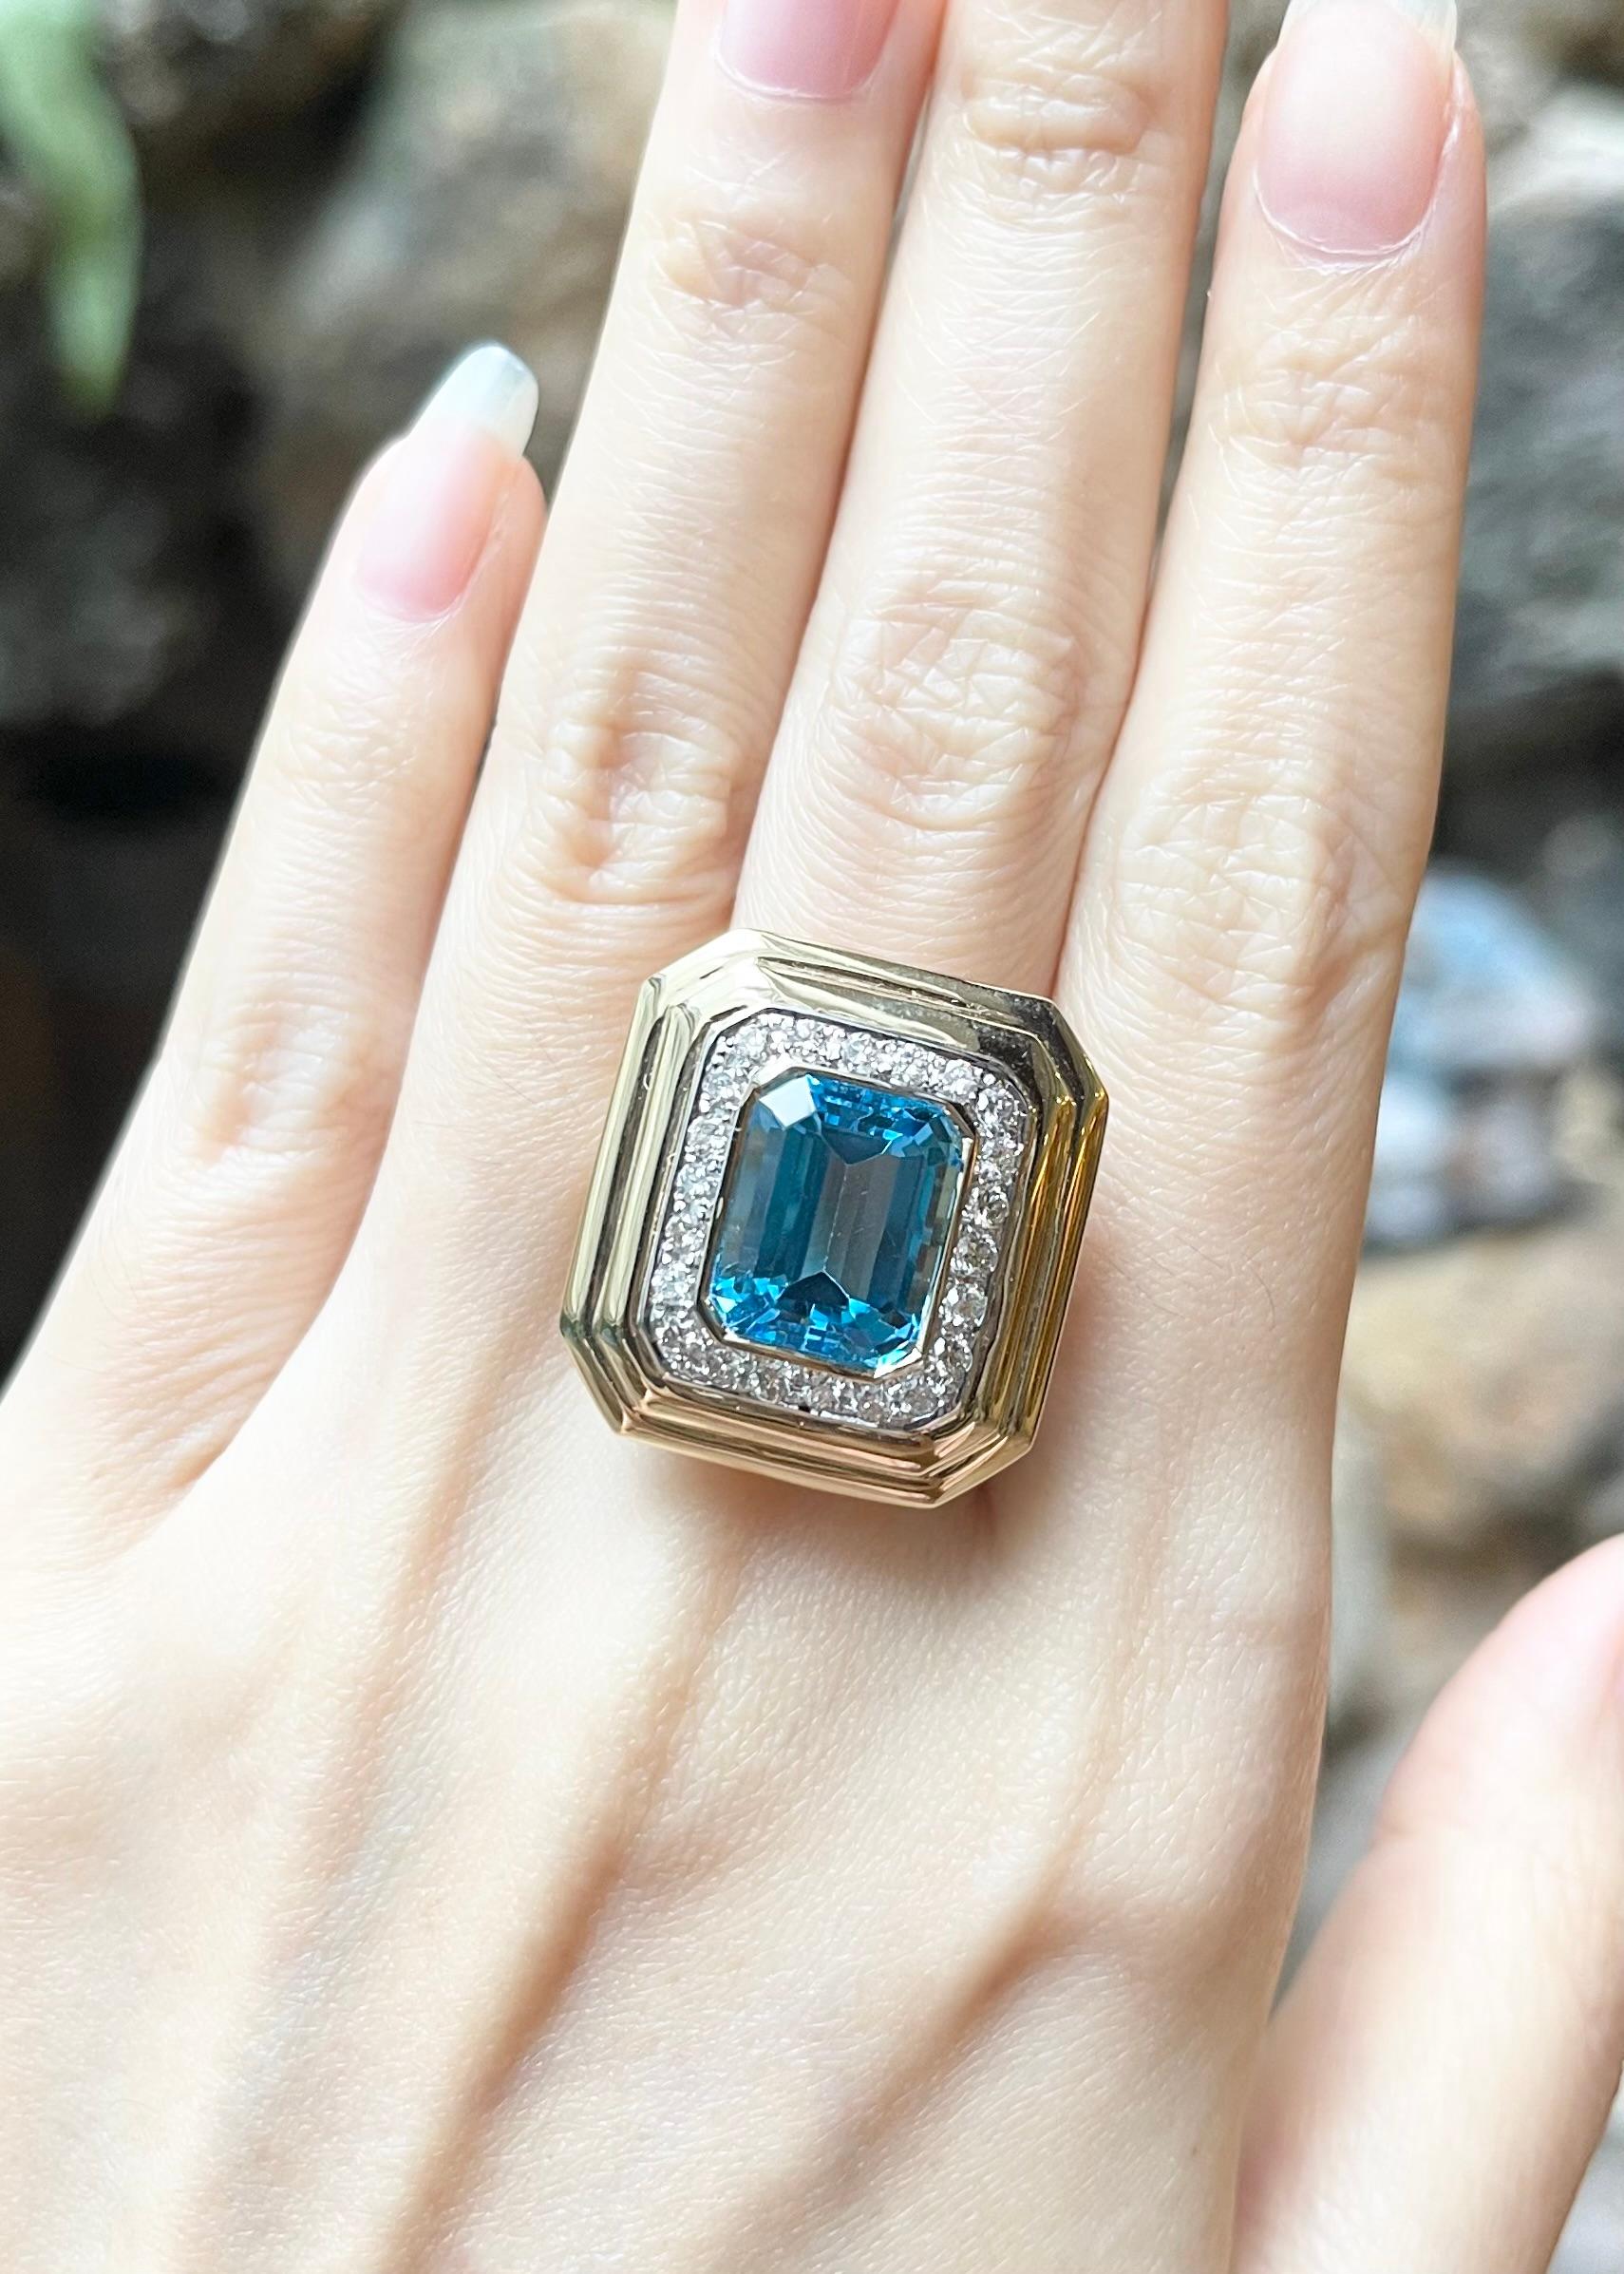 Blue Topaz 8.45 carats with Diamond 0.64 carat Ring set in 14k Gold Settings

Width:  2.1  cm 
Length: 2.4  cm
Ring Size: 55
Total Weight: 17.55 grams

